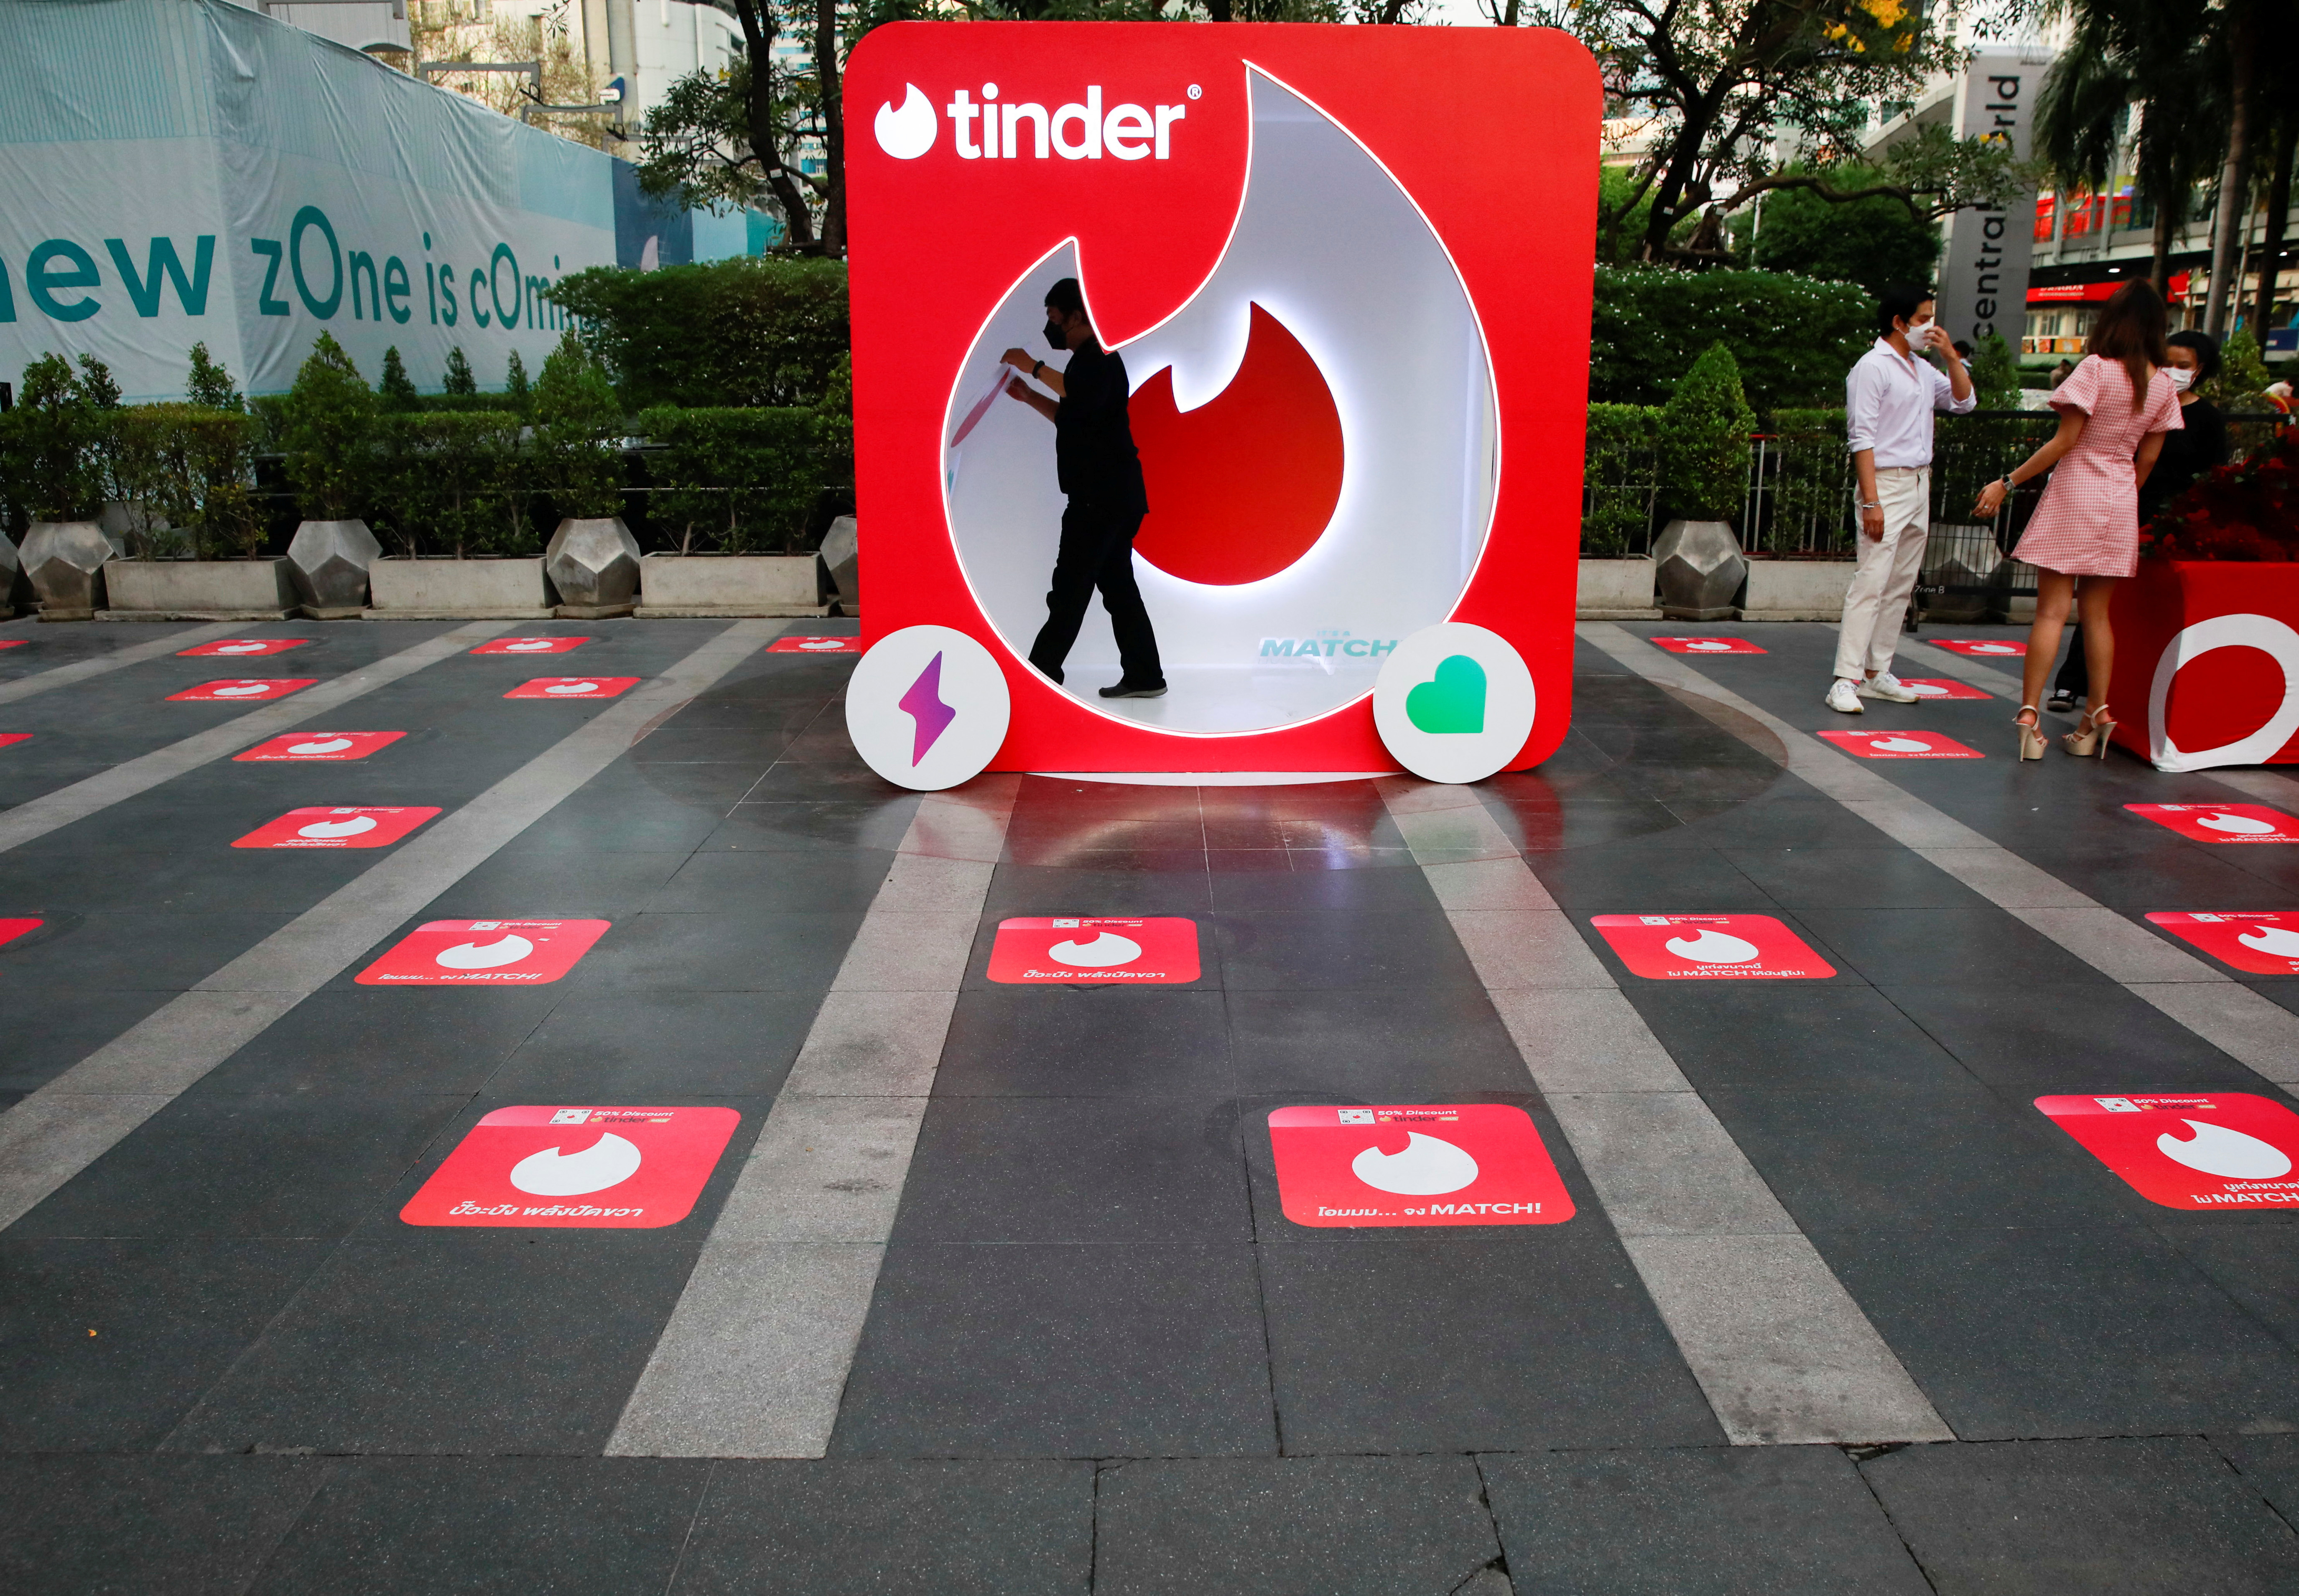 A Valentine's Day prayer with a Tinder twist for Thais